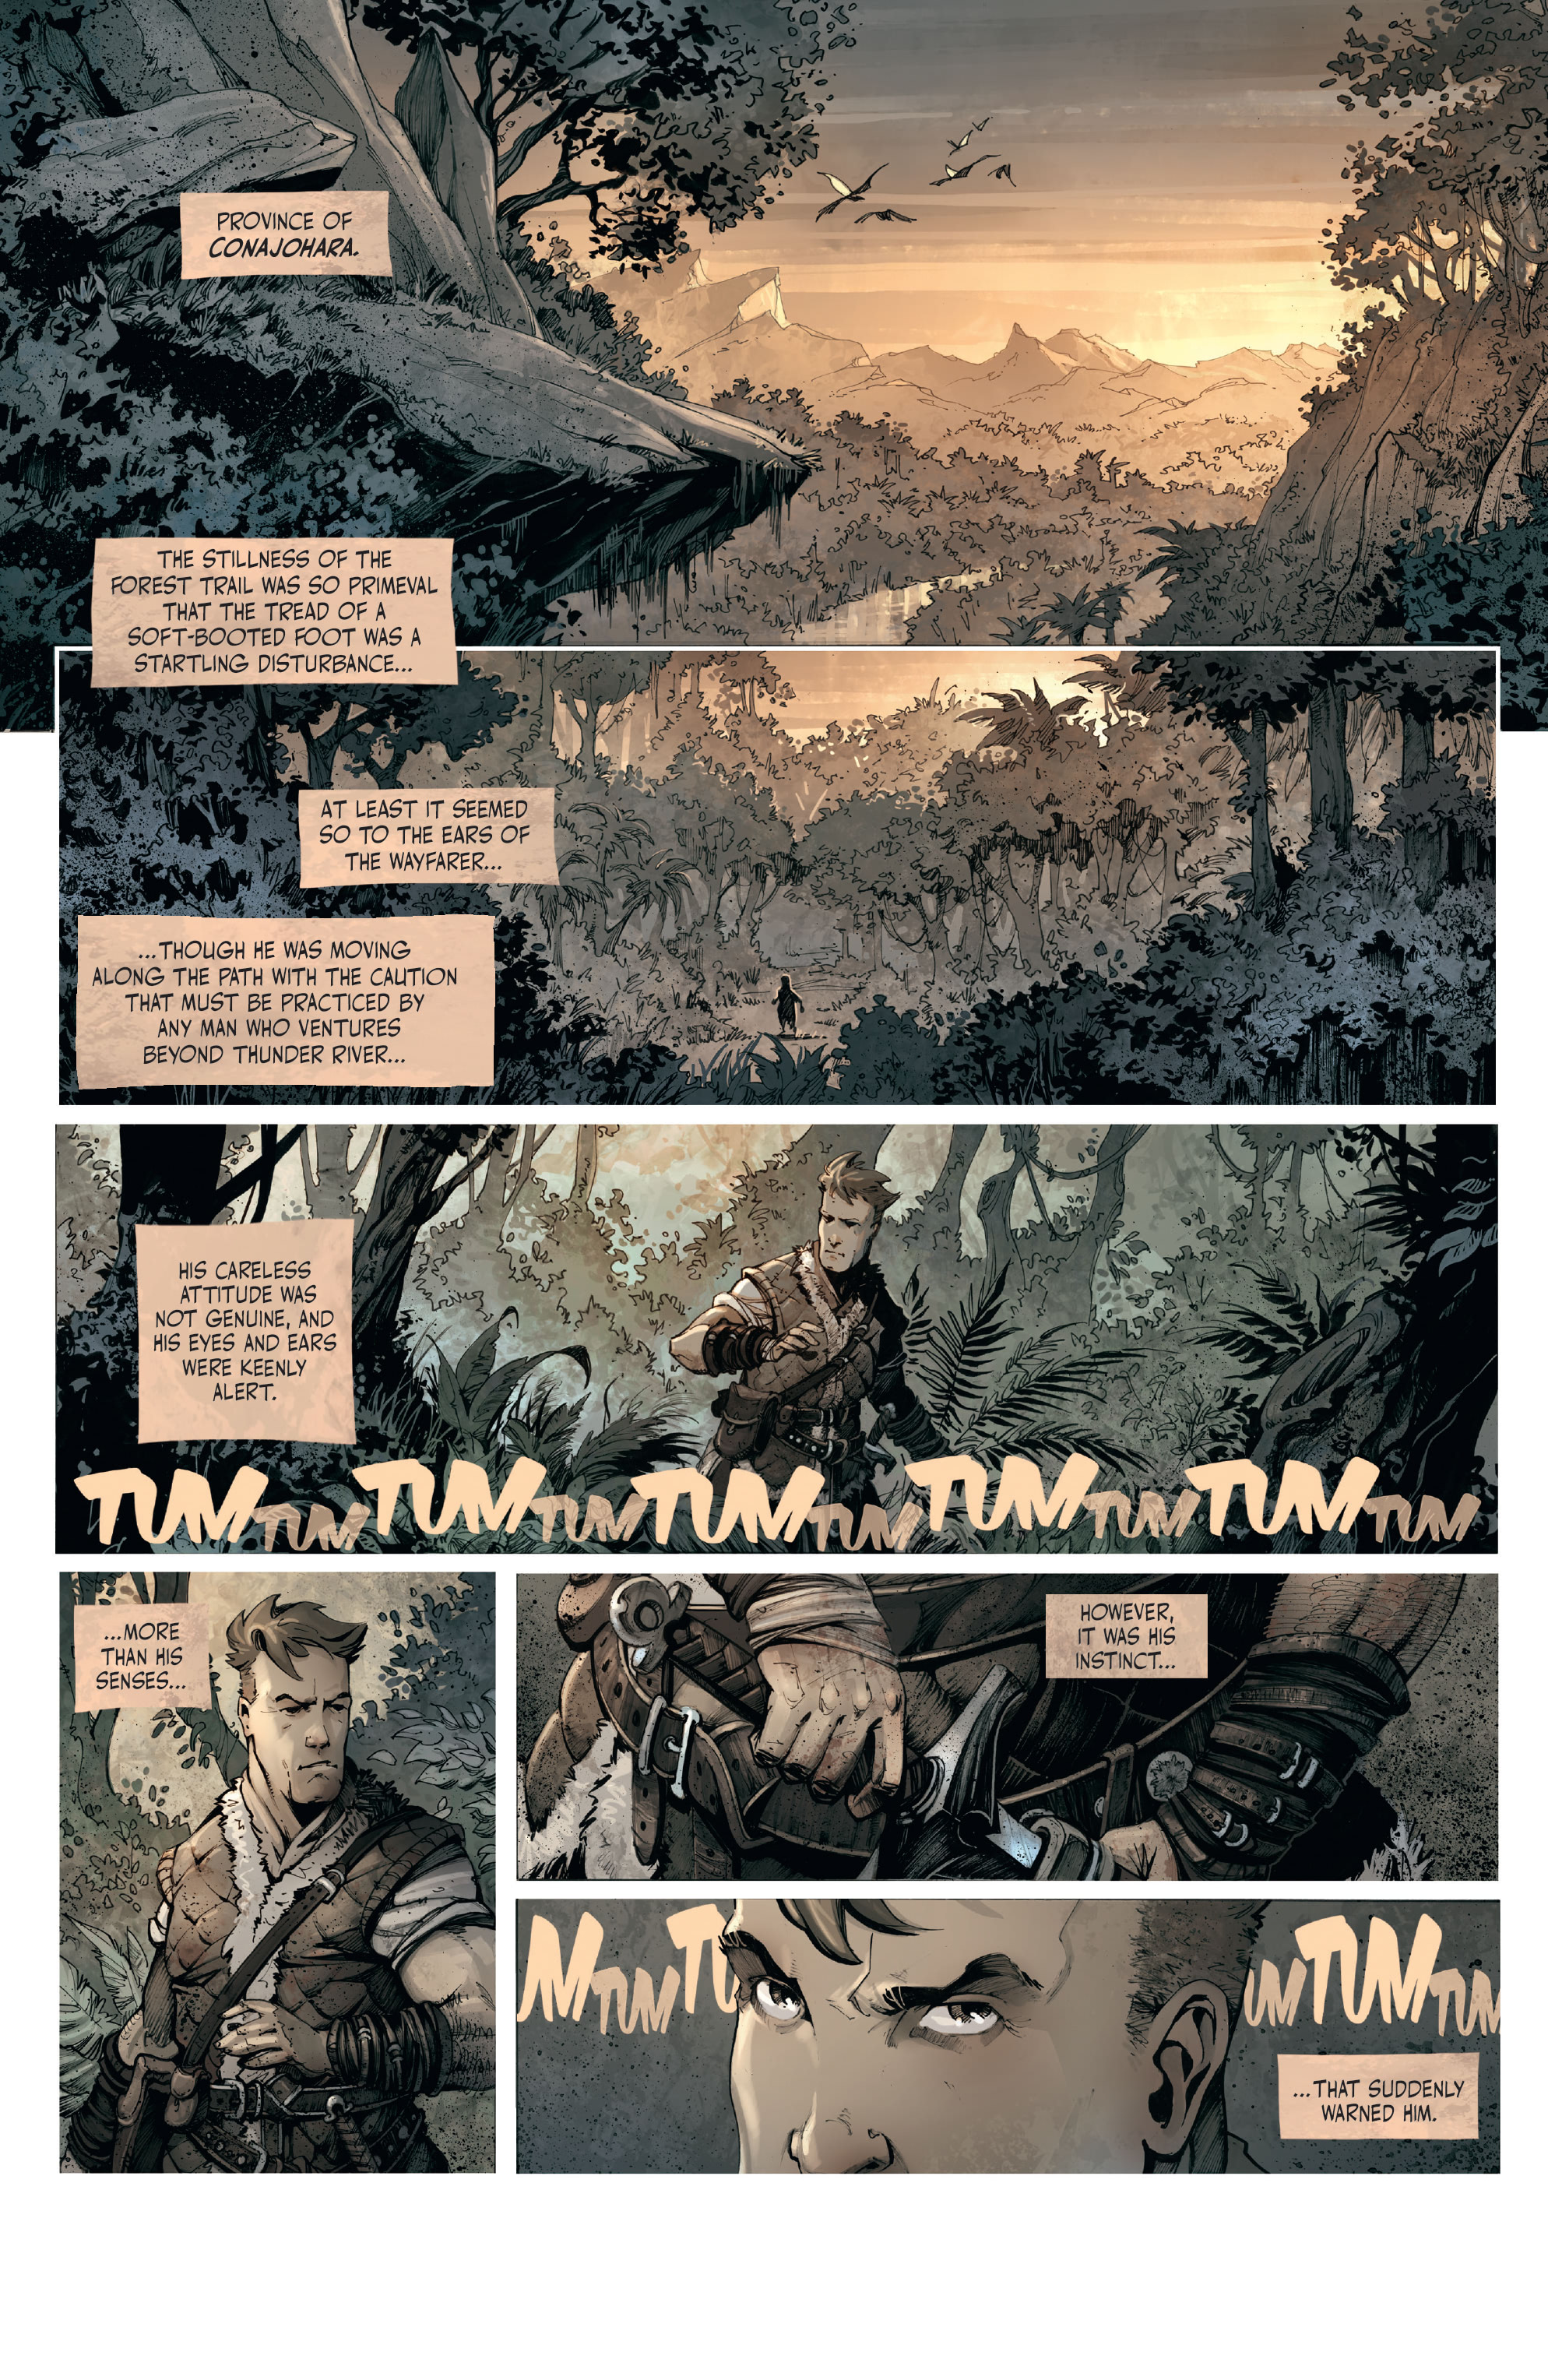 The Cimmerian: Beyond the Black River (2021-): Chapter 1 - Page 3